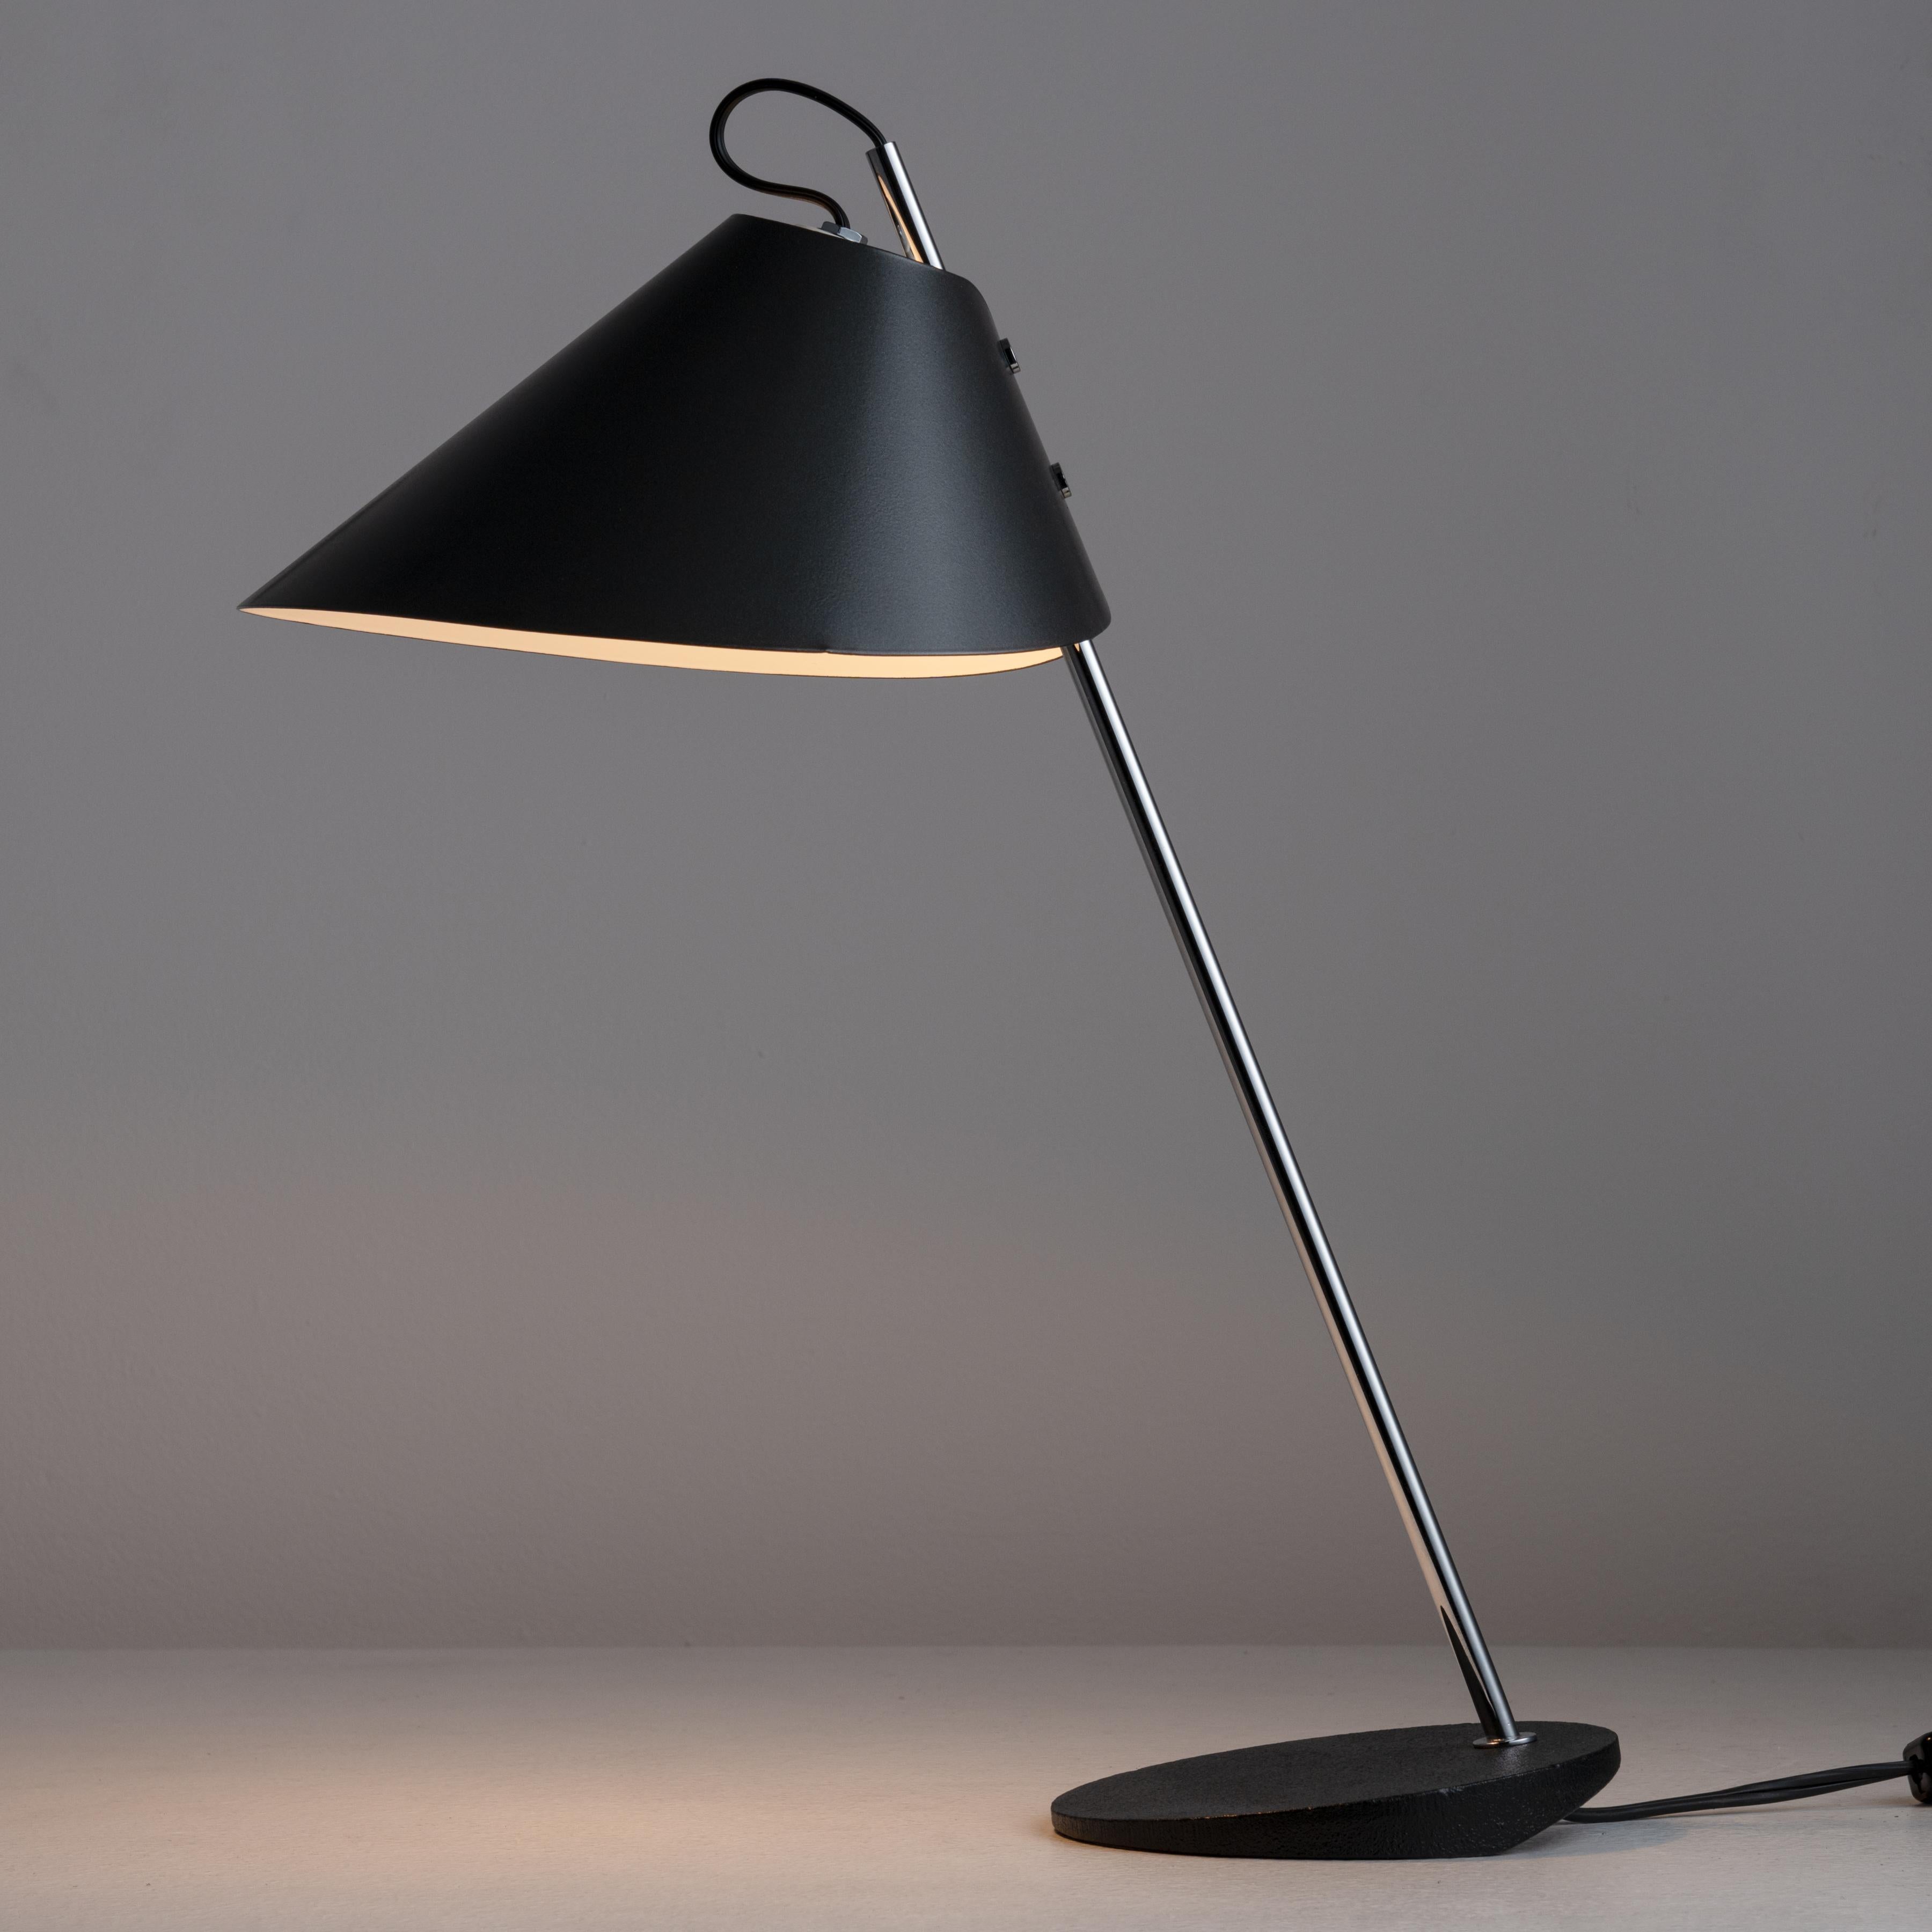 LTA2 'Base Ghisa' Table Lamp by Luigi Caccia Dominioni for Azucena. 21st Century Re-edition by Azucena. Chrome stem on a weighted enameled base. A metal enameled shade provides the diffuson. Adjustable neck height. E14 socket type, adapted for the